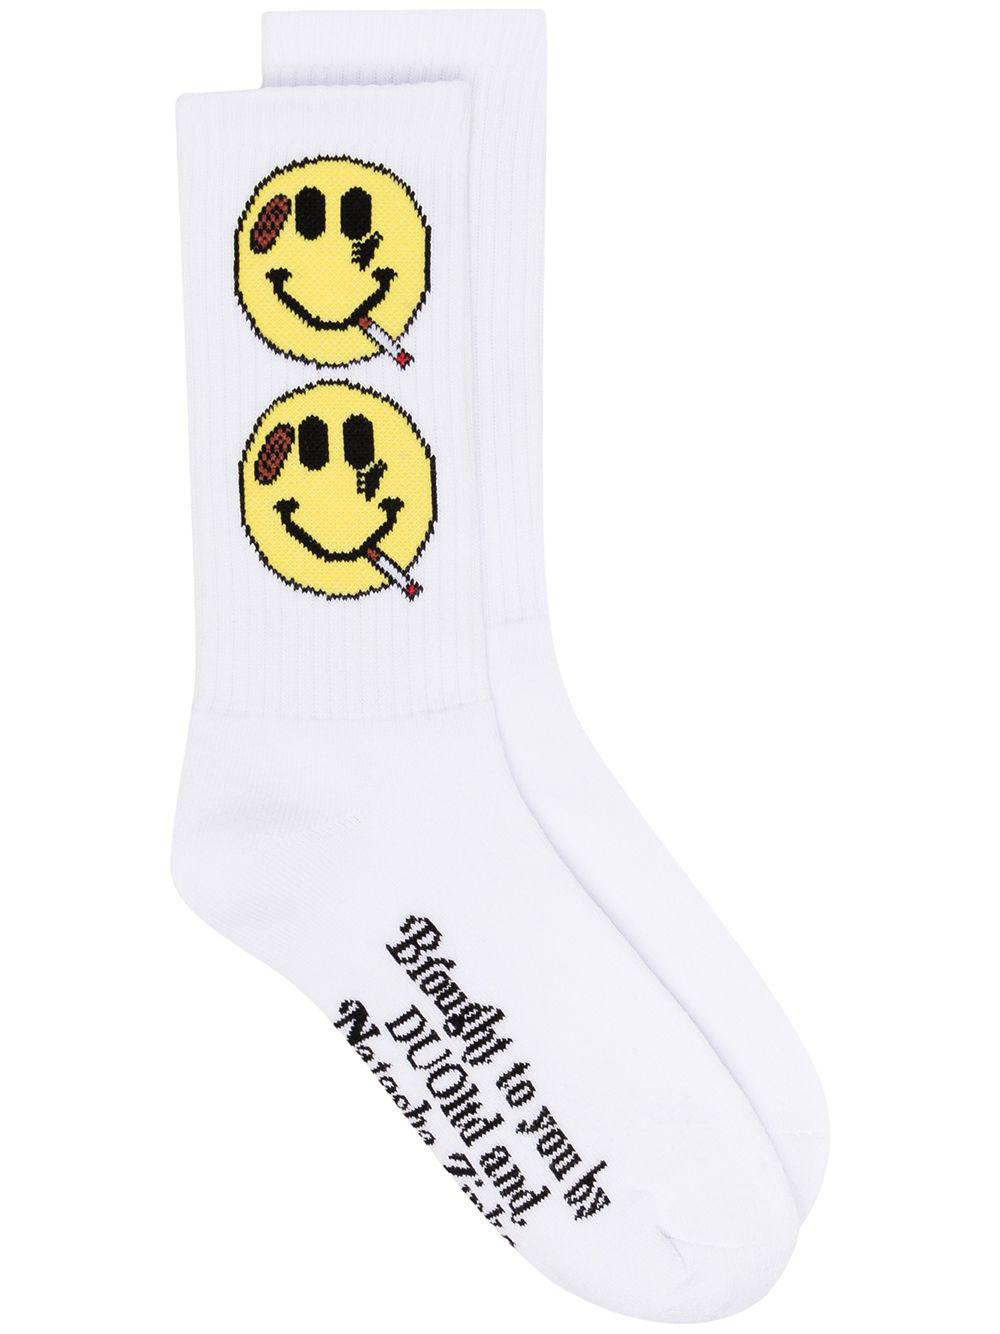 Isabel Marant Cotton Logo Embroidered Socks in Yellow White Womens Clothing Hosiery Socks 